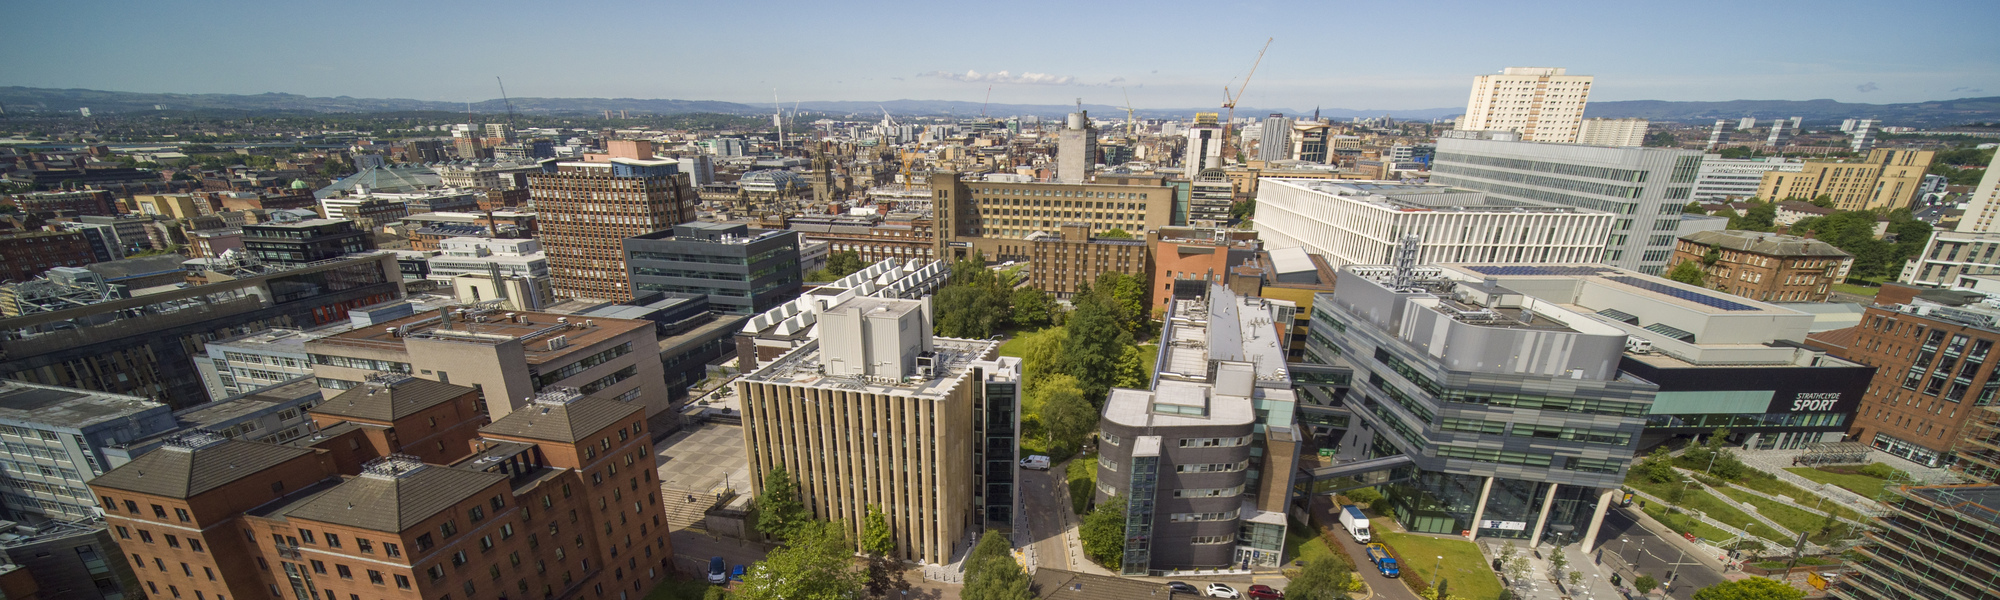 Aerial view of University of Strathclyde campus